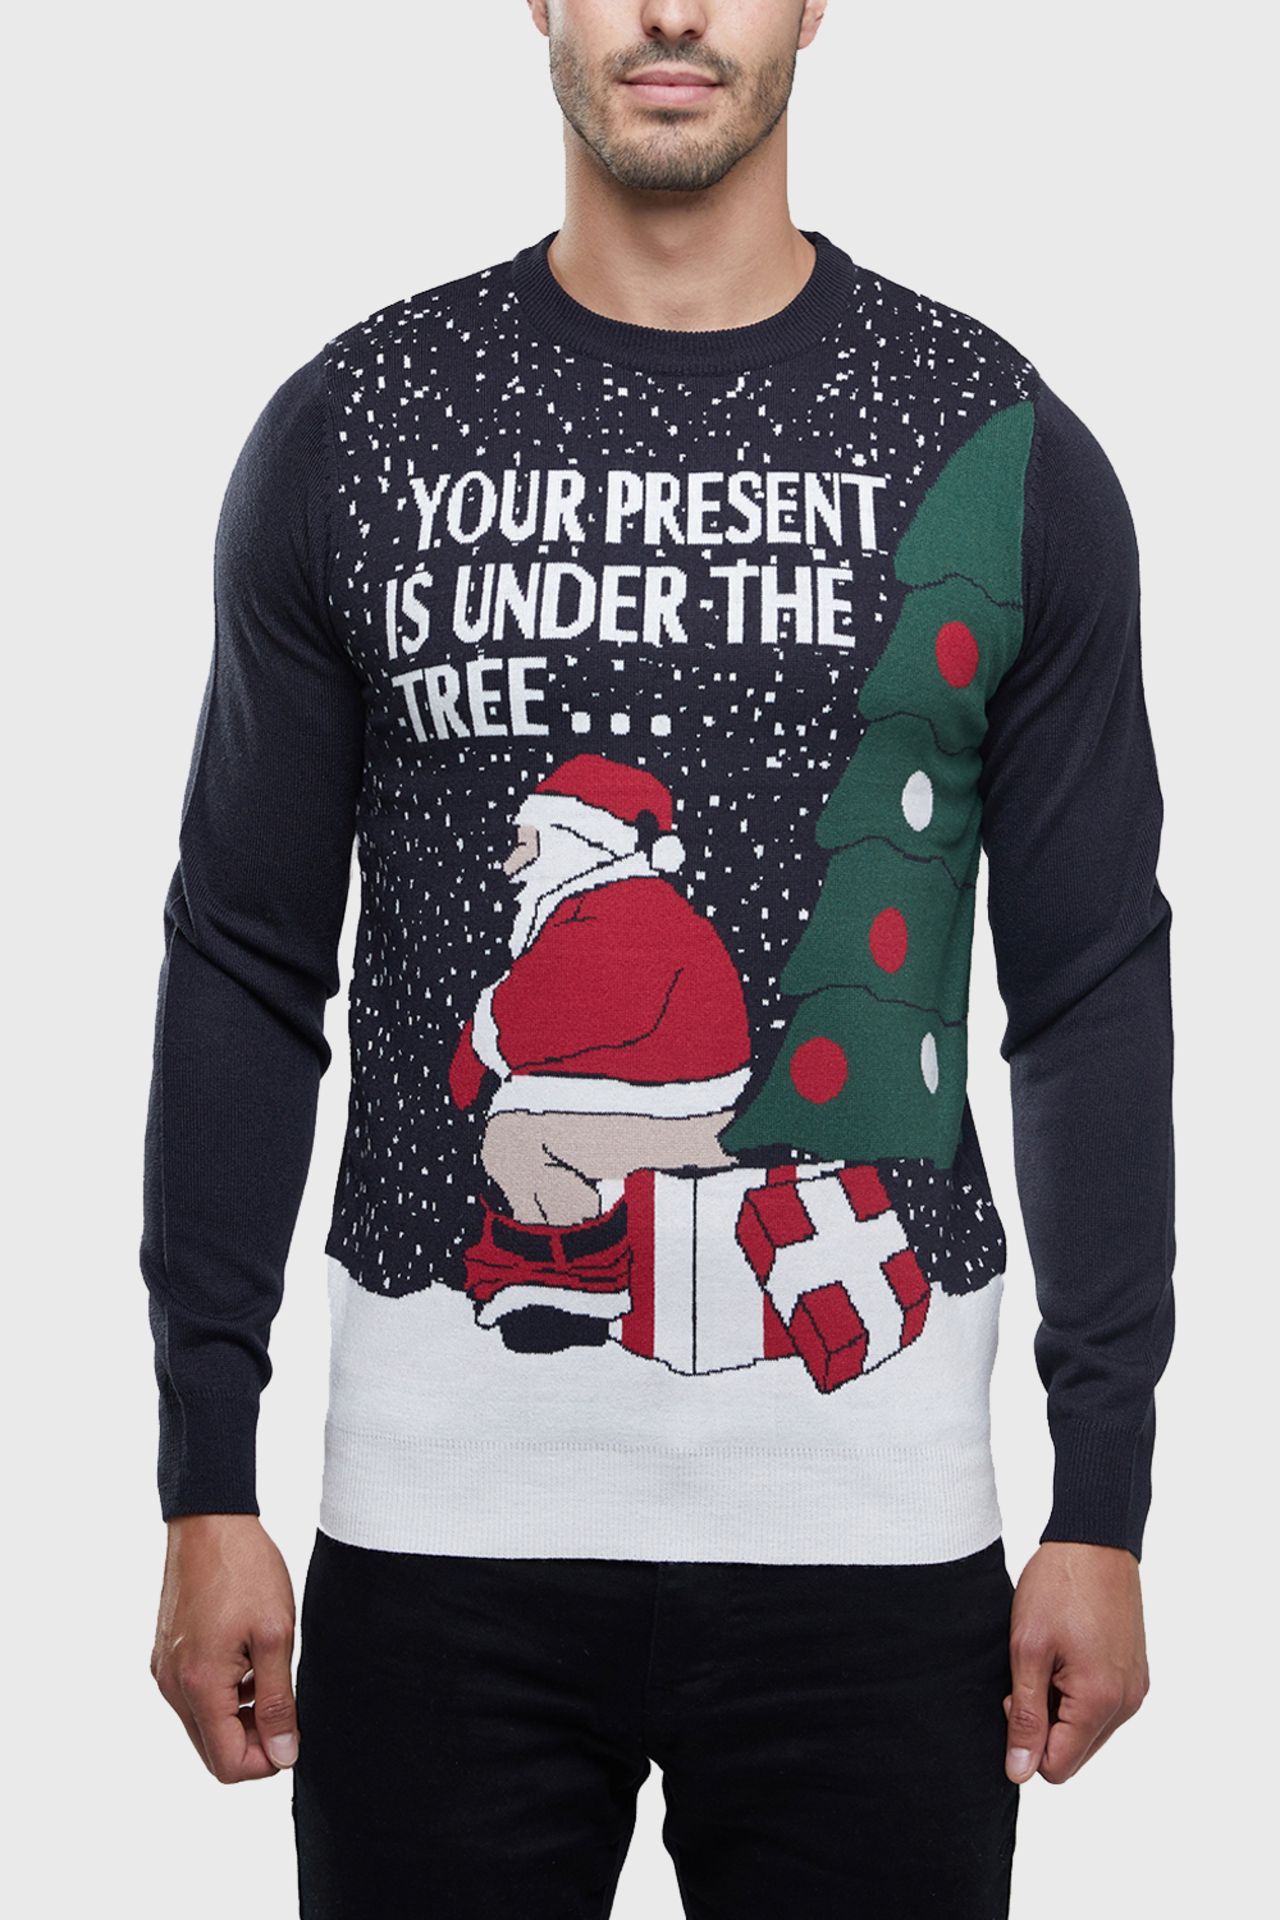 41 X BRAND NEW NOVELTY FESTIVE JUMPERS IE. ANIMATED RUNNING RUDOLPH (XXL-6, M-11), SANTA SLEIGH - Image 3 of 3